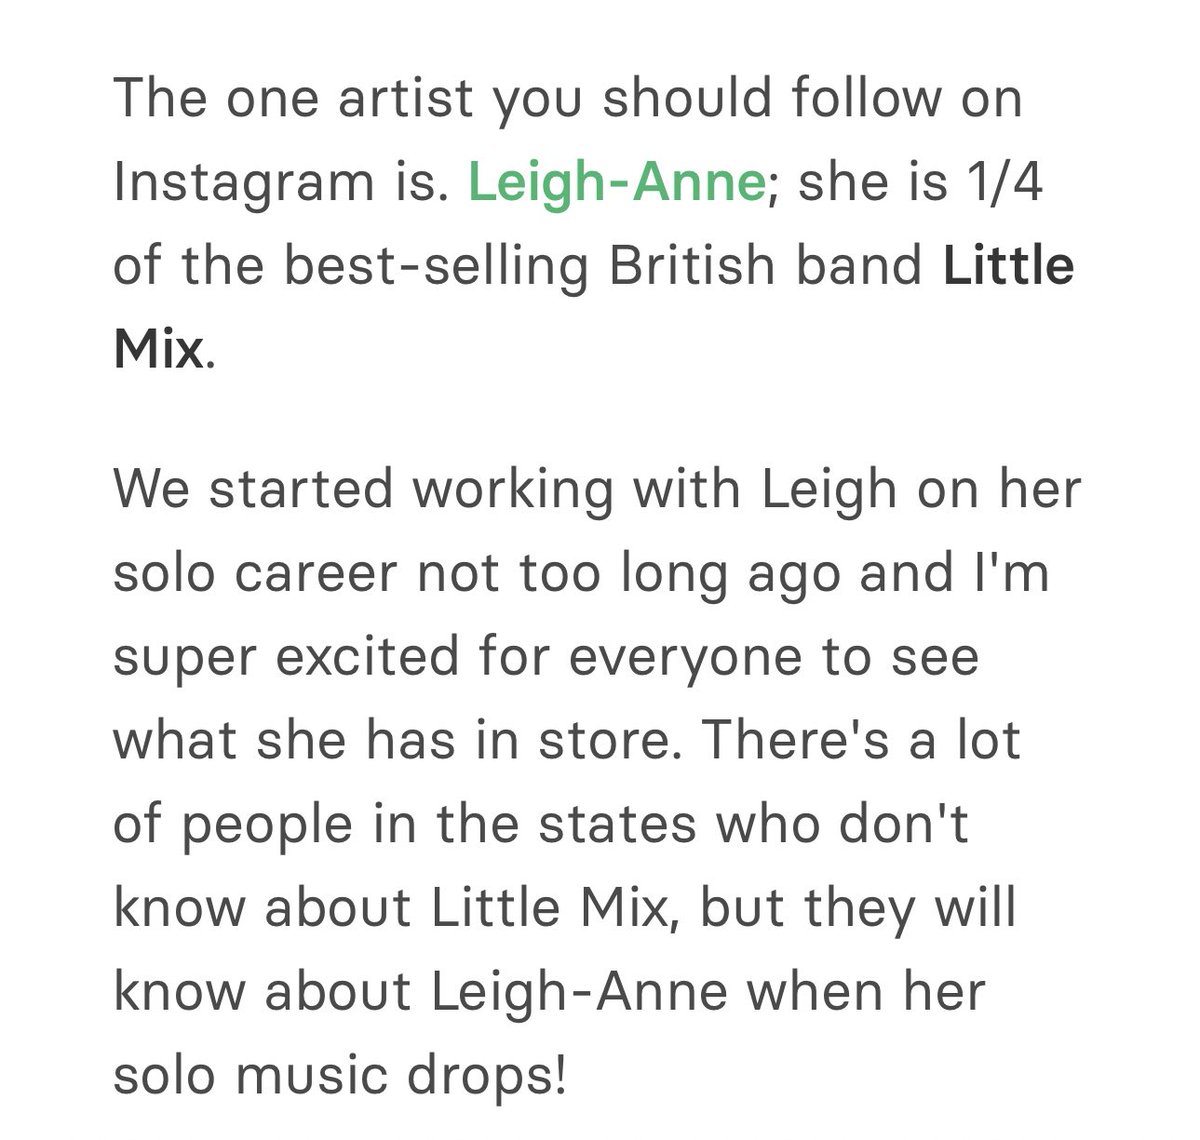 🚨 LEIGH-ANNE IS COMING

Justin Adams (A&R manager at Tap Music) on Leigh-Anne: 

“There's a lot of people in the states who don't know about Little Mix, but they will know about Leigh-Anne when her solo music drops!”